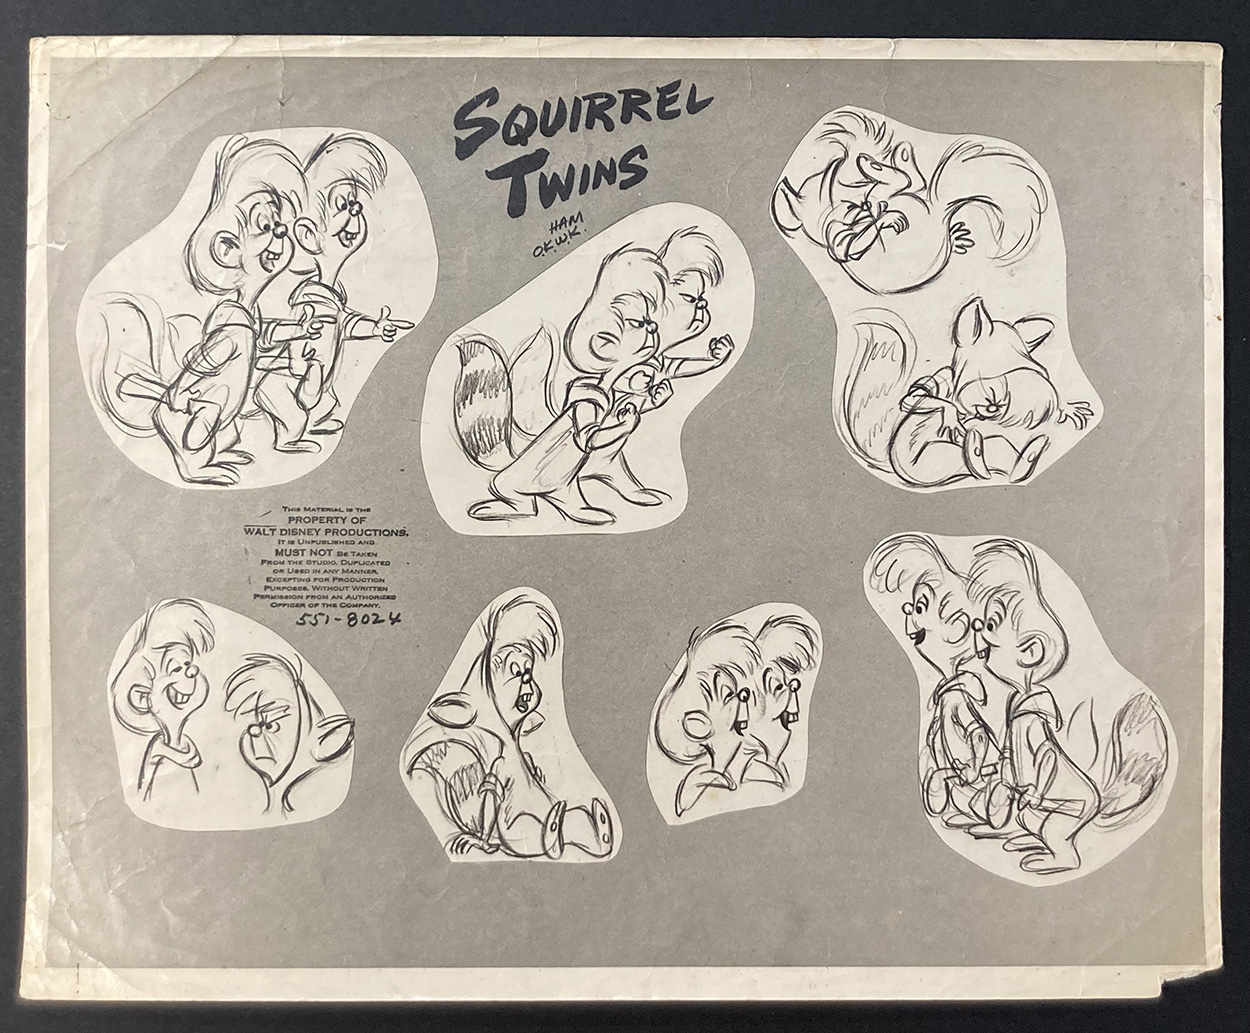 The Squirrel Twins, Lost Boys from Disney's Peter Pan (Ozalid) art by Disney Studio at The Illustration Art Gallery